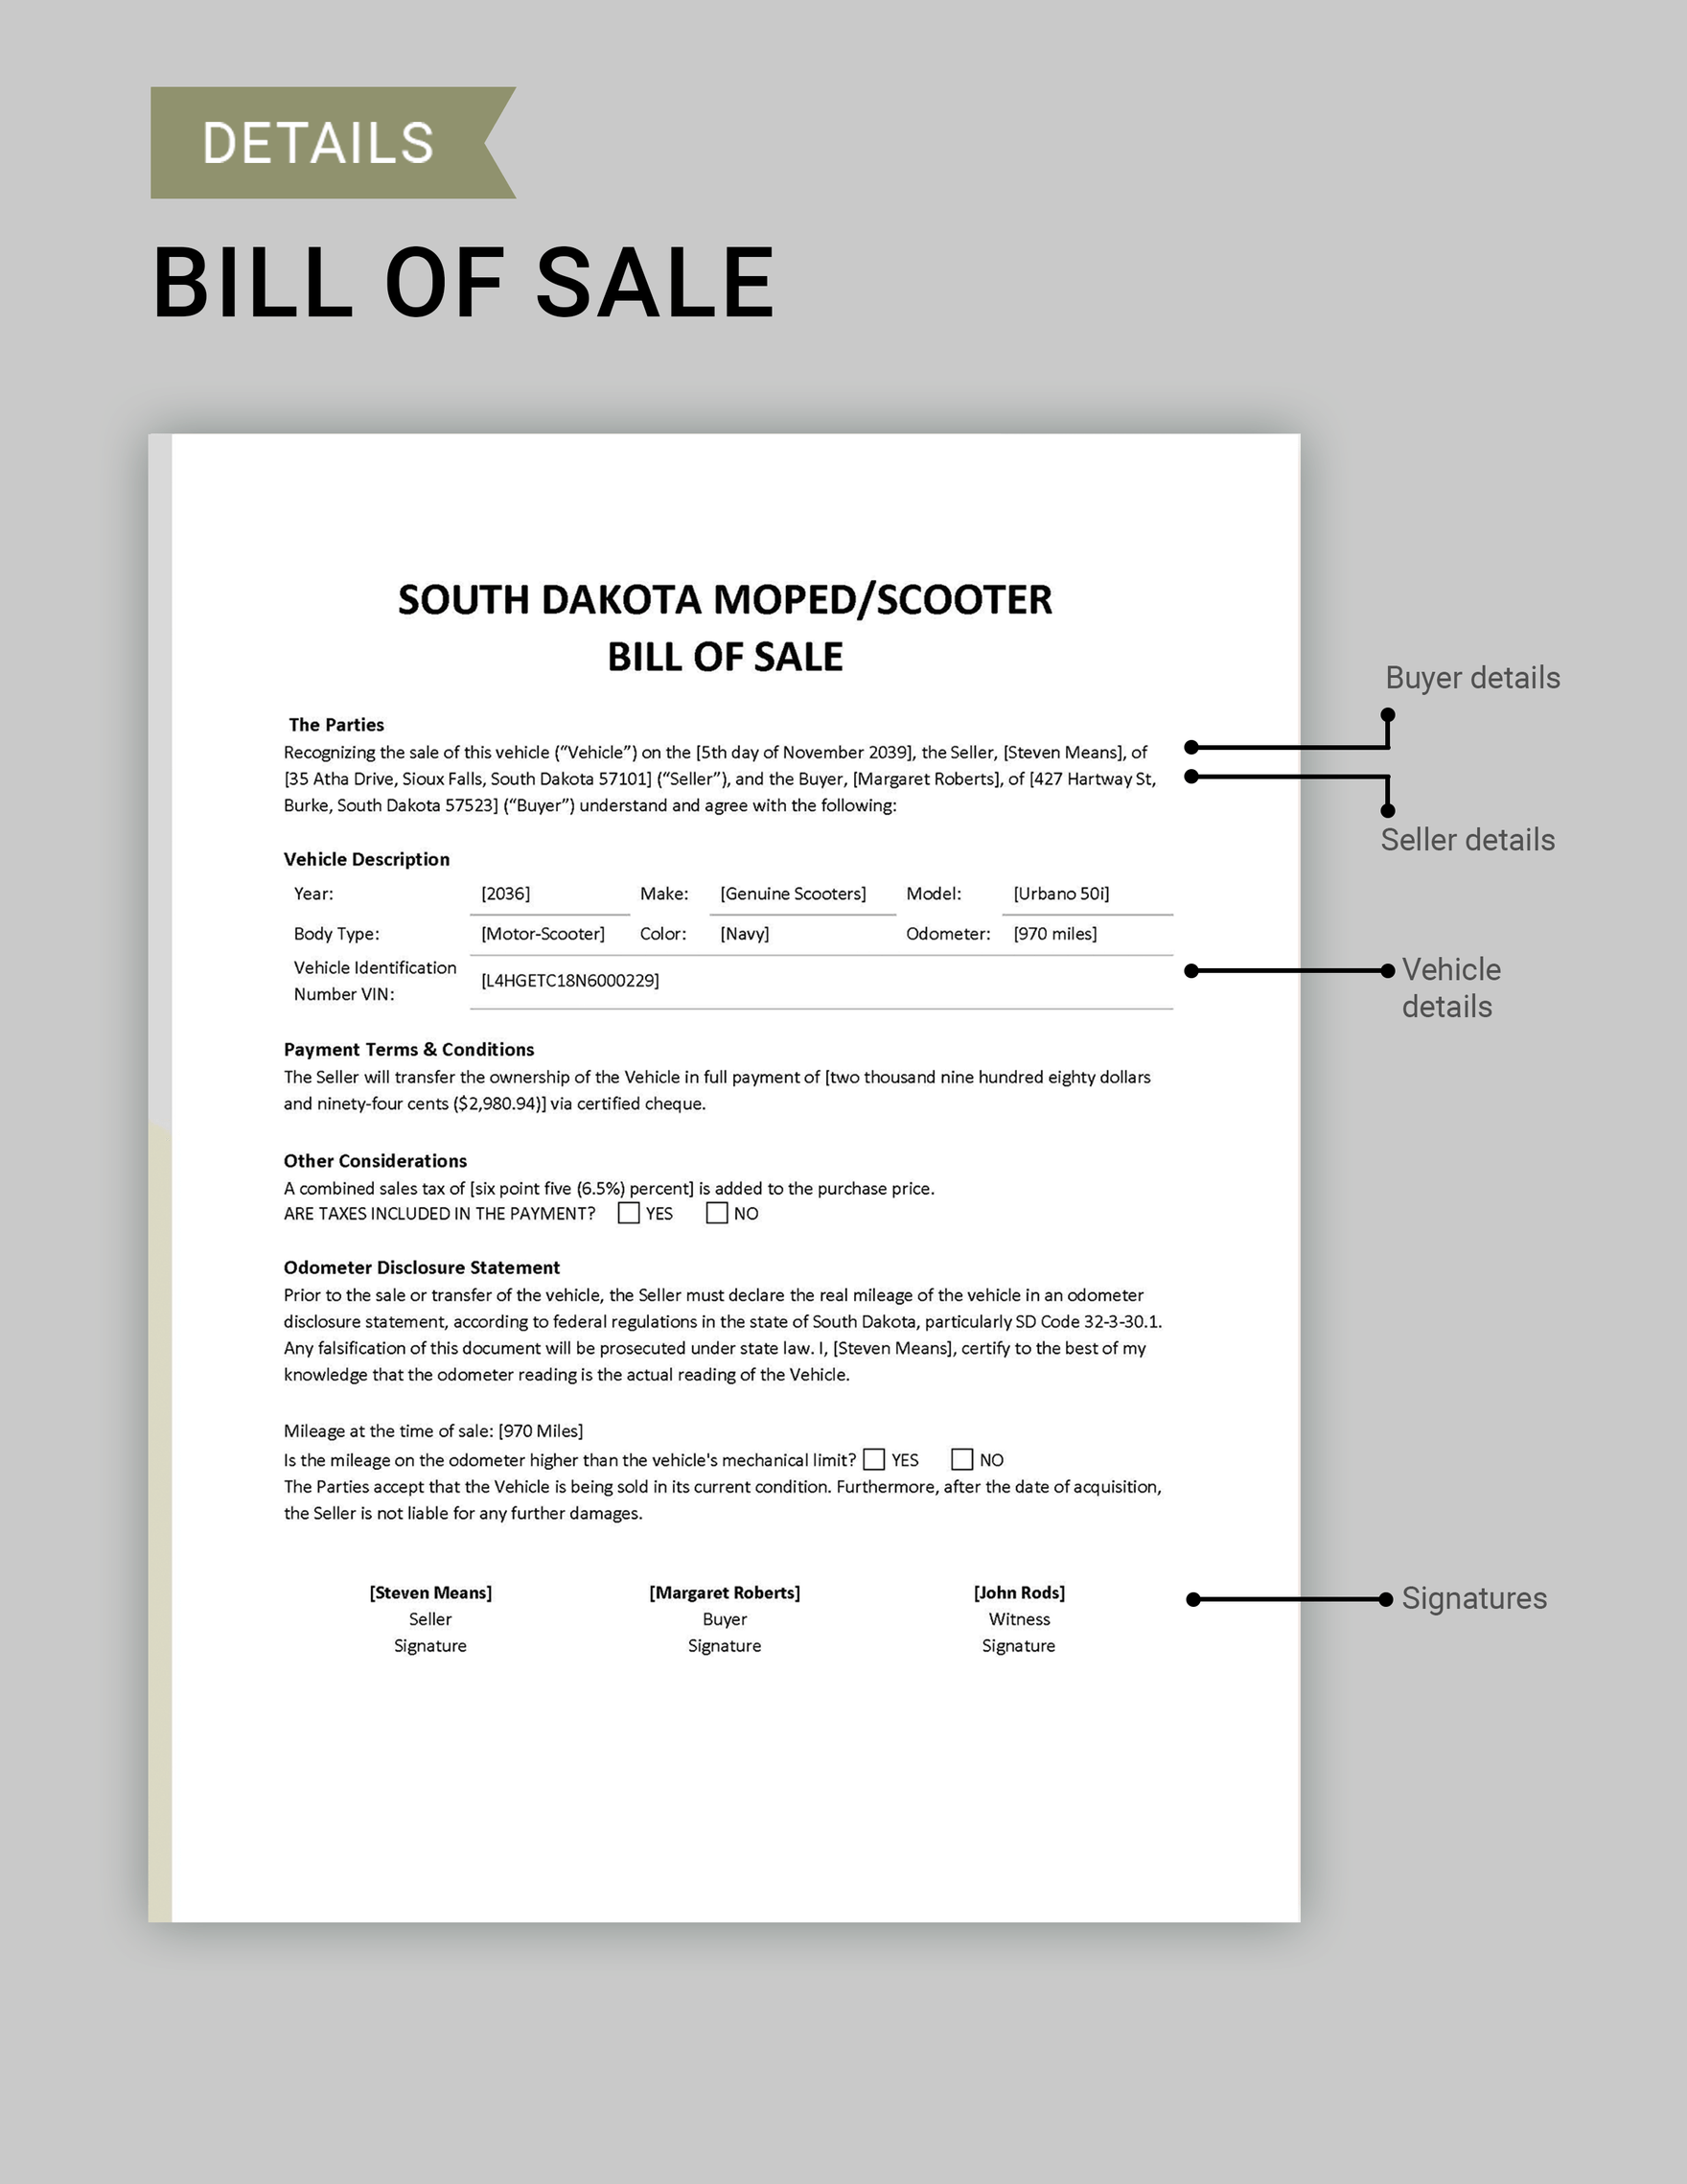 South Dakota Moped / Scooter Bill of Sale Form Template